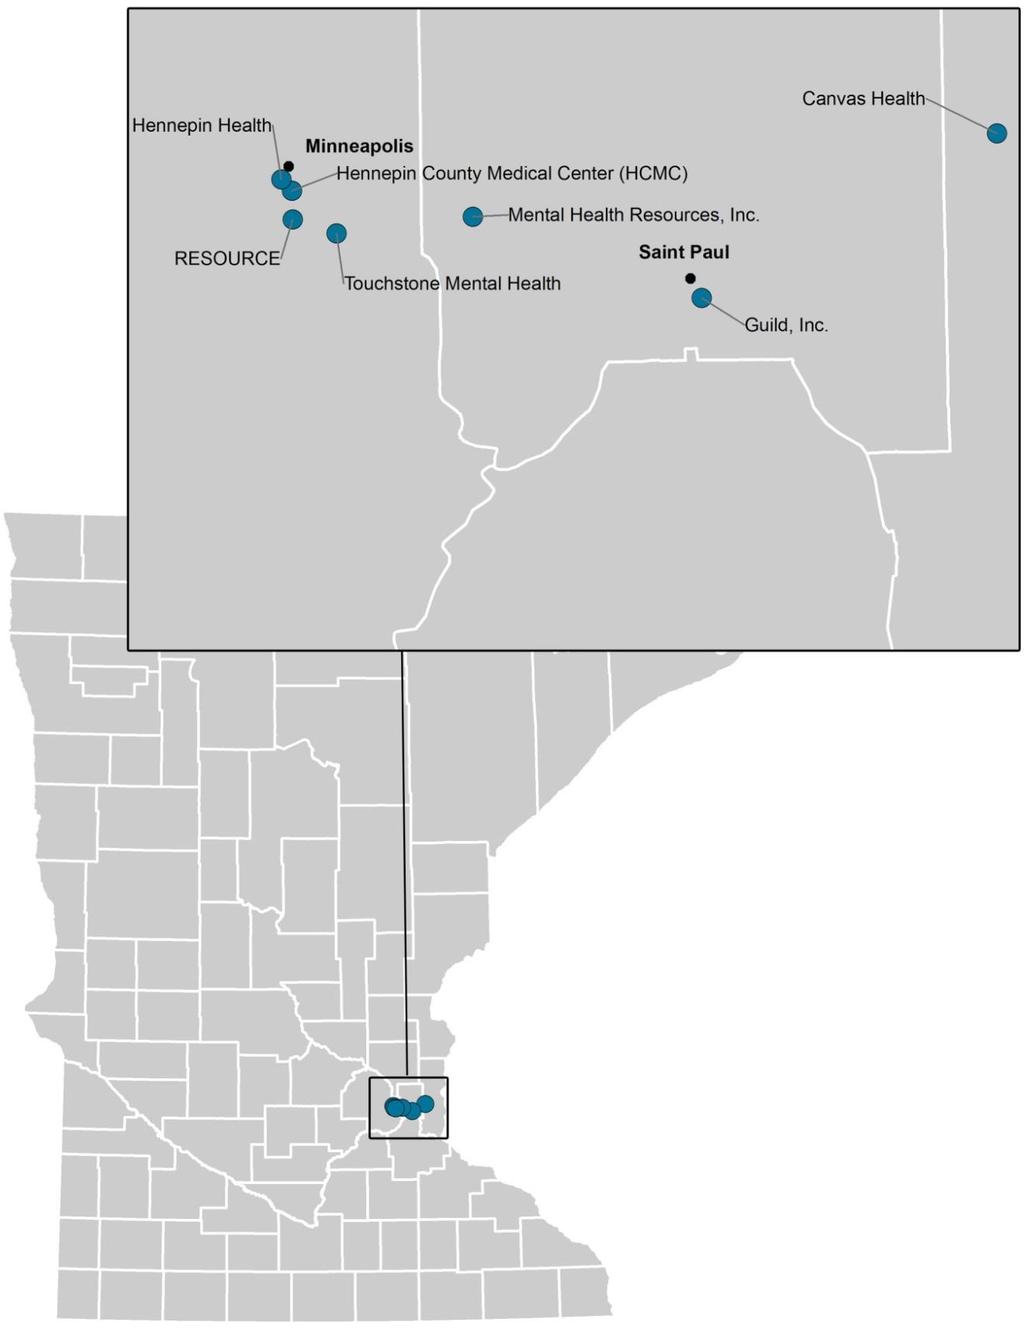 9. Mission Hennepin Collaborative Note: Plotted organizations may overlap because they are in close proximity.